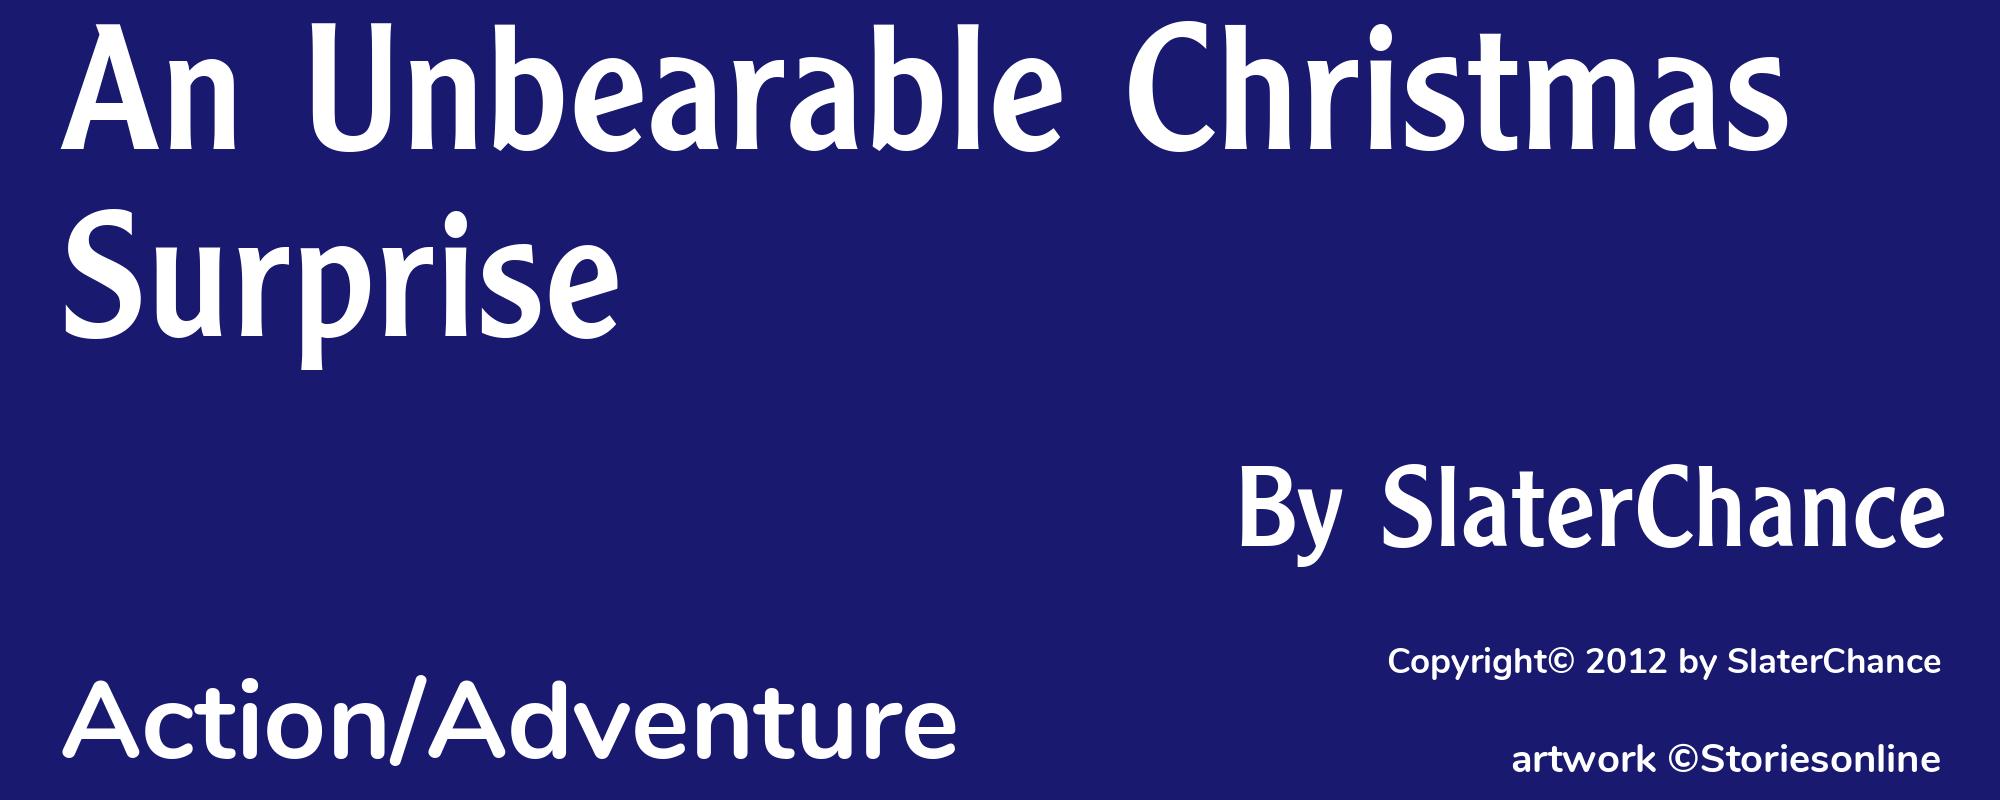 An Unbearable Christmas Surprise - Cover